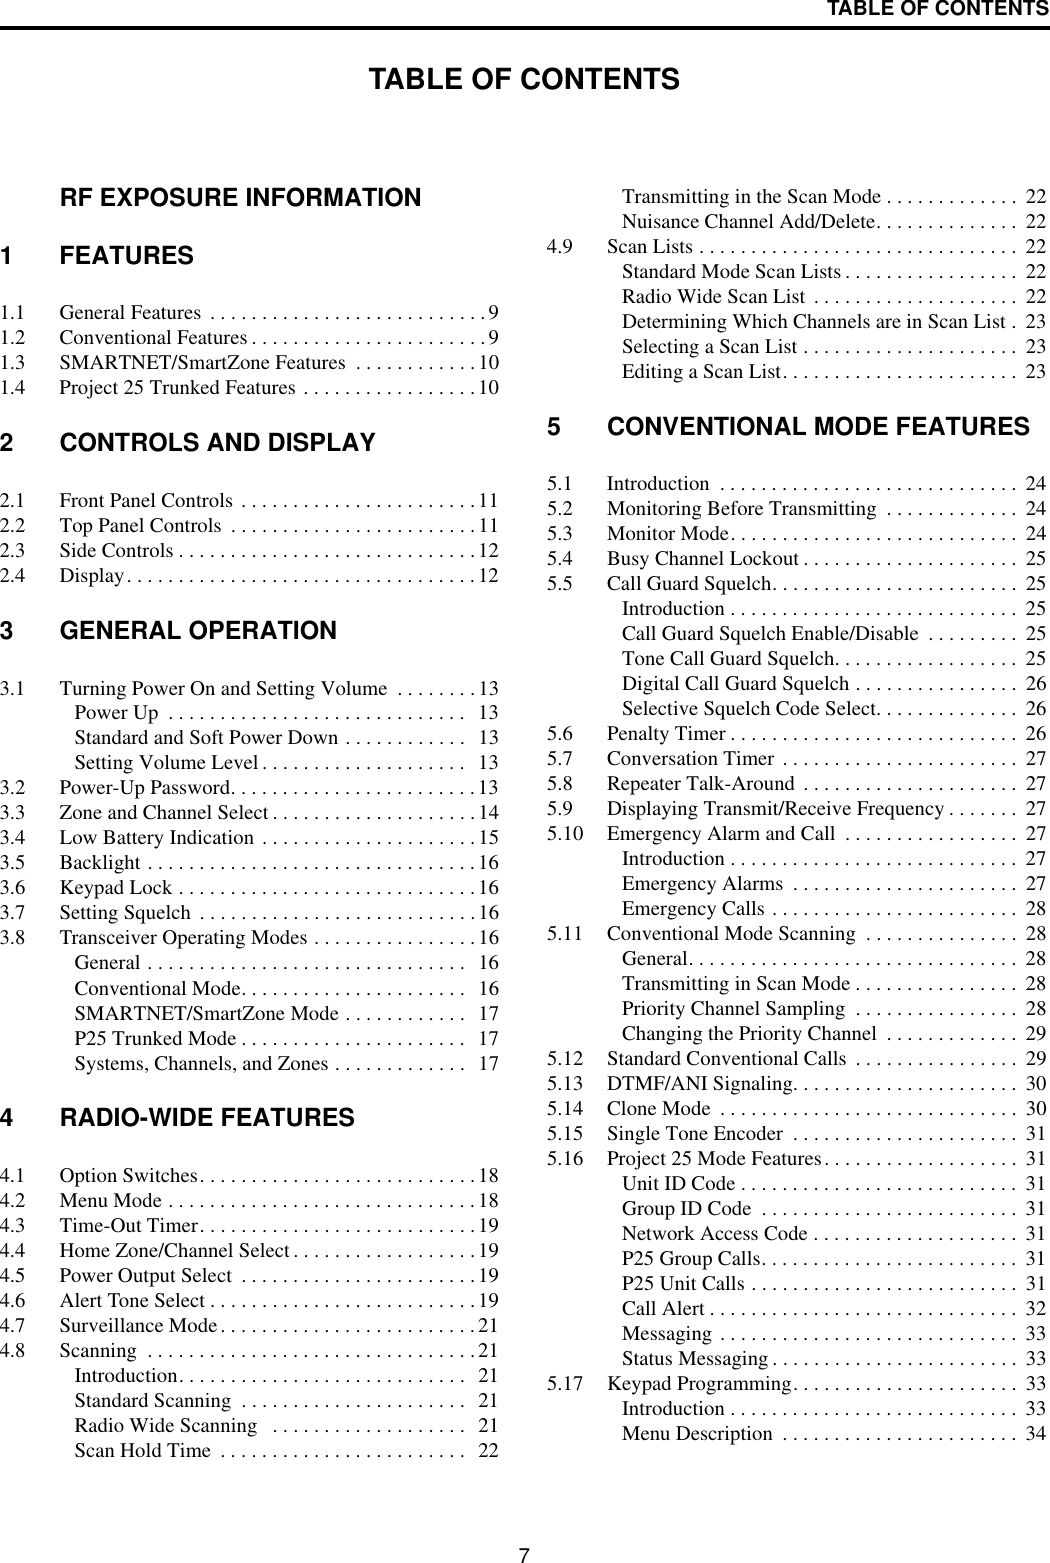 7TABLE OF CONTENTSTABLE OF CONTENTSRF EXPOSURE INFORMATION1 FEATURES1.1 General Features . . . . . . . . . . . . . . . . . . . . . . . . . . . 91.2 Conventional Features . . . . . . . . . . . . . . . . . . . . . . .91.3 SMARTNET/SmartZone Features  . . . . . . . . . . . .101.4 Project 25 Trunked Features . . . . . . . . . . . . . . . . .102 CONTROLS AND DISPLAY2.1 Front Panel Controls . . . . . . . . . . . . . . . . . . . . . . .112.2 Top Panel Controls  . . . . . . . . . . . . . . . . . . . . . . . .112.3 Side Controls . . . . . . . . . . . . . . . . . . . . . . . . . . . . .122.4 Display. . . . . . . . . . . . . . . . . . . . . . . . . . . . . . . . . .123 GENERAL OPERATION3.1 Turning Power On and Setting Volume  . . . . . . . .13Power Up  . . . . . . . . . . . . . . . . . . . . . . . . . . . . .  13Standard and Soft Power Down . . . . . . . . . . . .  13Setting Volume Level . . . . . . . . . . . . . . . . . . . .  133.2 Power-Up Password. . . . . . . . . . . . . . . . . . . . . . . .133.3 Zone and Channel Select . . . . . . . . . . . . . . . . . . . .143.4 Low Battery Indication . . . . . . . . . . . . . . . . . . . . . 153.5 Backlight . . . . . . . . . . . . . . . . . . . . . . . . . . . . . . . .163.6 Keypad Lock . . . . . . . . . . . . . . . . . . . . . . . . . . . . .163.7 Setting Squelch . . . . . . . . . . . . . . . . . . . . . . . . . . .163.8 Transceiver Operating Modes . . . . . . . . . . . . . . . .16General . . . . . . . . . . . . . . . . . . . . . . . . . . . . . . .  16Conventional Mode. . . . . . . . . . . . . . . . . . . . . .  16SMARTNET/SmartZone Mode . . . . . . . . . . . .  17P25 Trunked Mode . . . . . . . . . . . . . . . . . . . . . .  17Systems, Channels, and Zones . . . . . . . . . . . . .  174 RADIO-WIDE FEATURES4.1 Option Switches. . . . . . . . . . . . . . . . . . . . . . . . . . .184.2 Menu Mode . . . . . . . . . . . . . . . . . . . . . . . . . . . . . .184.3 Time-Out Timer. . . . . . . . . . . . . . . . . . . . . . . . . . .194.4 Home Zone/Channel Select . . . . . . . . . . . . . . . . . .194.5 Power Output Select  . . . . . . . . . . . . . . . . . . . . . . .194.6 Alert Tone Select . . . . . . . . . . . . . . . . . . . . . . . . . .194.7 Surveillance Mode. . . . . . . . . . . . . . . . . . . . . . . . .214.8 Scanning  . . . . . . . . . . . . . . . . . . . . . . . . . . . . . . . .21Introduction. . . . . . . . . . . . . . . . . . . . . . . . . . . .  21Standard Scanning  . . . . . . . . . . . . . . . . . . . . . .  21Radio Wide Scanning   . . . . . . . . . . . . . . . . . . .  21Scan Hold Time  . . . . . . . . . . . . . . . . . . . . . . . .  22Transmitting in the Scan Mode . . . . . . . . . . . . .  22Nuisance Channel Add/Delete. . . . . . . . . . . . . .  224.9 Scan Lists . . . . . . . . . . . . . . . . . . . . . . . . . . . . . . .  22Standard Mode Scan Lists . . . . . . . . . . . . . . . . .  22Radio Wide Scan List . . . . . . . . . . . . . . . . . . . .  22Determining Which Channels are in Scan List .  23Selecting a Scan List . . . . . . . . . . . . . . . . . . . . .  23Editing a Scan List. . . . . . . . . . . . . . . . . . . . . . .  235 CONVENTIONAL MODE FEATURES5.1 Introduction  . . . . . . . . . . . . . . . . . . . . . . . . . . . . .  245.2 Monitoring Before Transmitting  . . . . . . . . . . . . .  245.3 Monitor Mode. . . . . . . . . . . . . . . . . . . . . . . . . . . .  245.4 Busy Channel Lockout . . . . . . . . . . . . . . . . . . . . .  255.5 Call Guard Squelch. . . . . . . . . . . . . . . . . . . . . . . .  25Introduction . . . . . . . . . . . . . . . . . . . . . . . . . . . .  25Call Guard Squelch Enable/Disable  . . . . . . . . .  25Tone Call Guard Squelch. . . . . . . . . . . . . . . . . .  25Digital Call Guard Squelch . . . . . . . . . . . . . . . .  26Selective Squelch Code Select. . . . . . . . . . . . . .  265.6 Penalty Timer . . . . . . . . . . . . . . . . . . . . . . . . . . . .  265.7 Conversation Timer . . . . . . . . . . . . . . . . . . . . . . .  275.8 Repeater Talk-Around  . . . . . . . . . . . . . . . . . . . . .  275.9 Displaying Transmit/Receive Frequency . . . . . . .  275.10 Emergency Alarm and Call  . . . . . . . . . . . . . . . . .  27Introduction . . . . . . . . . . . . . . . . . . . . . . . . . . . .  27Emergency Alarms  . . . . . . . . . . . . . . . . . . . . . .  27Emergency Calls . . . . . . . . . . . . . . . . . . . . . . . .  285.11 Conventional Mode Scanning  . . . . . . . . . . . . . . .  28General. . . . . . . . . . . . . . . . . . . . . . . . . . . . . . . .  28Transmitting in Scan Mode . . . . . . . . . . . . . . . .  28Priority Channel Sampling  . . . . . . . . . . . . . . . .  28Changing the Priority Channel  . . . . . . . . . . . . .  295.12 Standard Conventional Calls  . . . . . . . . . . . . . . . .  295.13 DTMF/ANI Signaling. . . . . . . . . . . . . . . . . . . . . .  305.14 Clone Mode  . . . . . . . . . . . . . . . . . . . . . . . . . . . . .  305.15 Single Tone Encoder  . . . . . . . . . . . . . . . . . . . . . .  315.16 Project 25 Mode Features. . . . . . . . . . . . . . . . . . .  31Unit ID Code . . . . . . . . . . . . . . . . . . . . . . . . . . .  31Group ID Code  . . . . . . . . . . . . . . . . . . . . . . . . .  31Network Access Code . . . . . . . . . . . . . . . . . . . .  31P25 Group Calls. . . . . . . . . . . . . . . . . . . . . . . . .  31P25 Unit Calls . . . . . . . . . . . . . . . . . . . . . . . . . .  31Call Alert . . . . . . . . . . . . . . . . . . . . . . . . . . . . . .  32Messaging . . . . . . . . . . . . . . . . . . . . . . . . . . . . .  33Status Messaging . . . . . . . . . . . . . . . . . . . . . . . .  335.17 Keypad Programming. . . . . . . . . . . . . . . . . . . . . .  33Introduction . . . . . . . . . . . . . . . . . . . . . . . . . . . .  33Menu Description  . . . . . . . . . . . . . . . . . . . . . . .  34